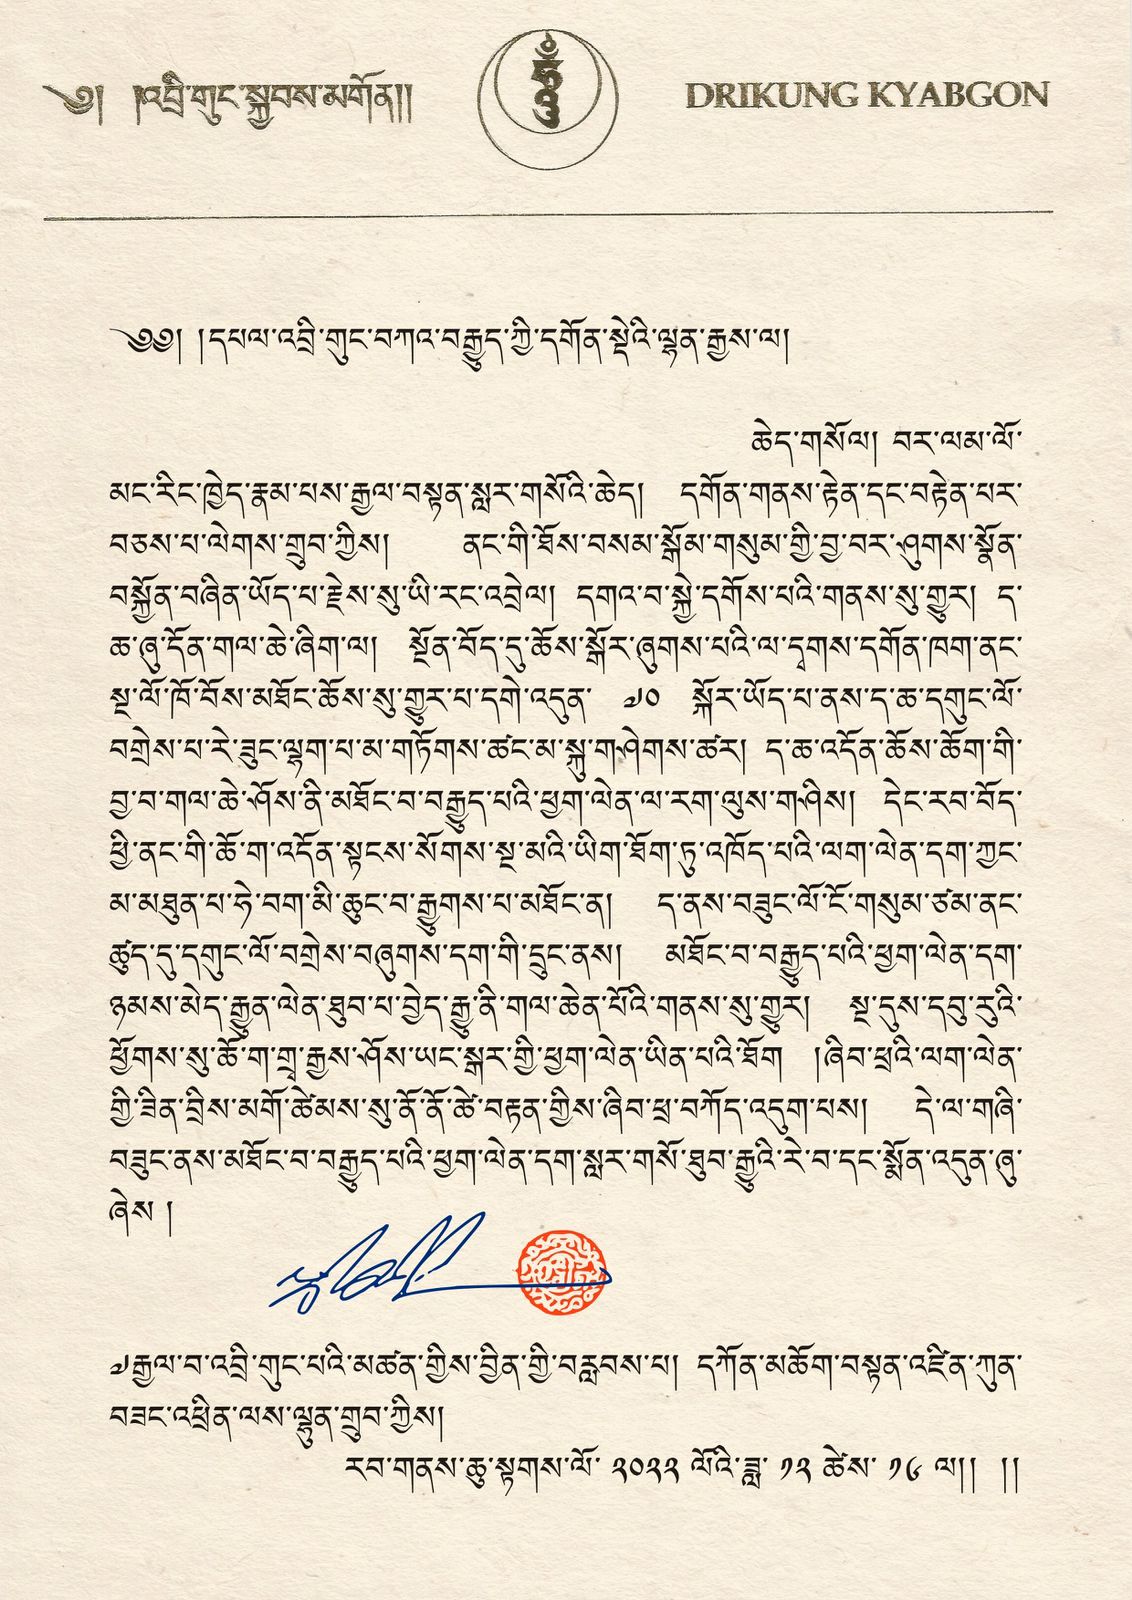 His Holiness the Drikung Kyabgon Thinly Lhundup, shared the following message to all the monasteries of the glorious Drikung Kagyu.